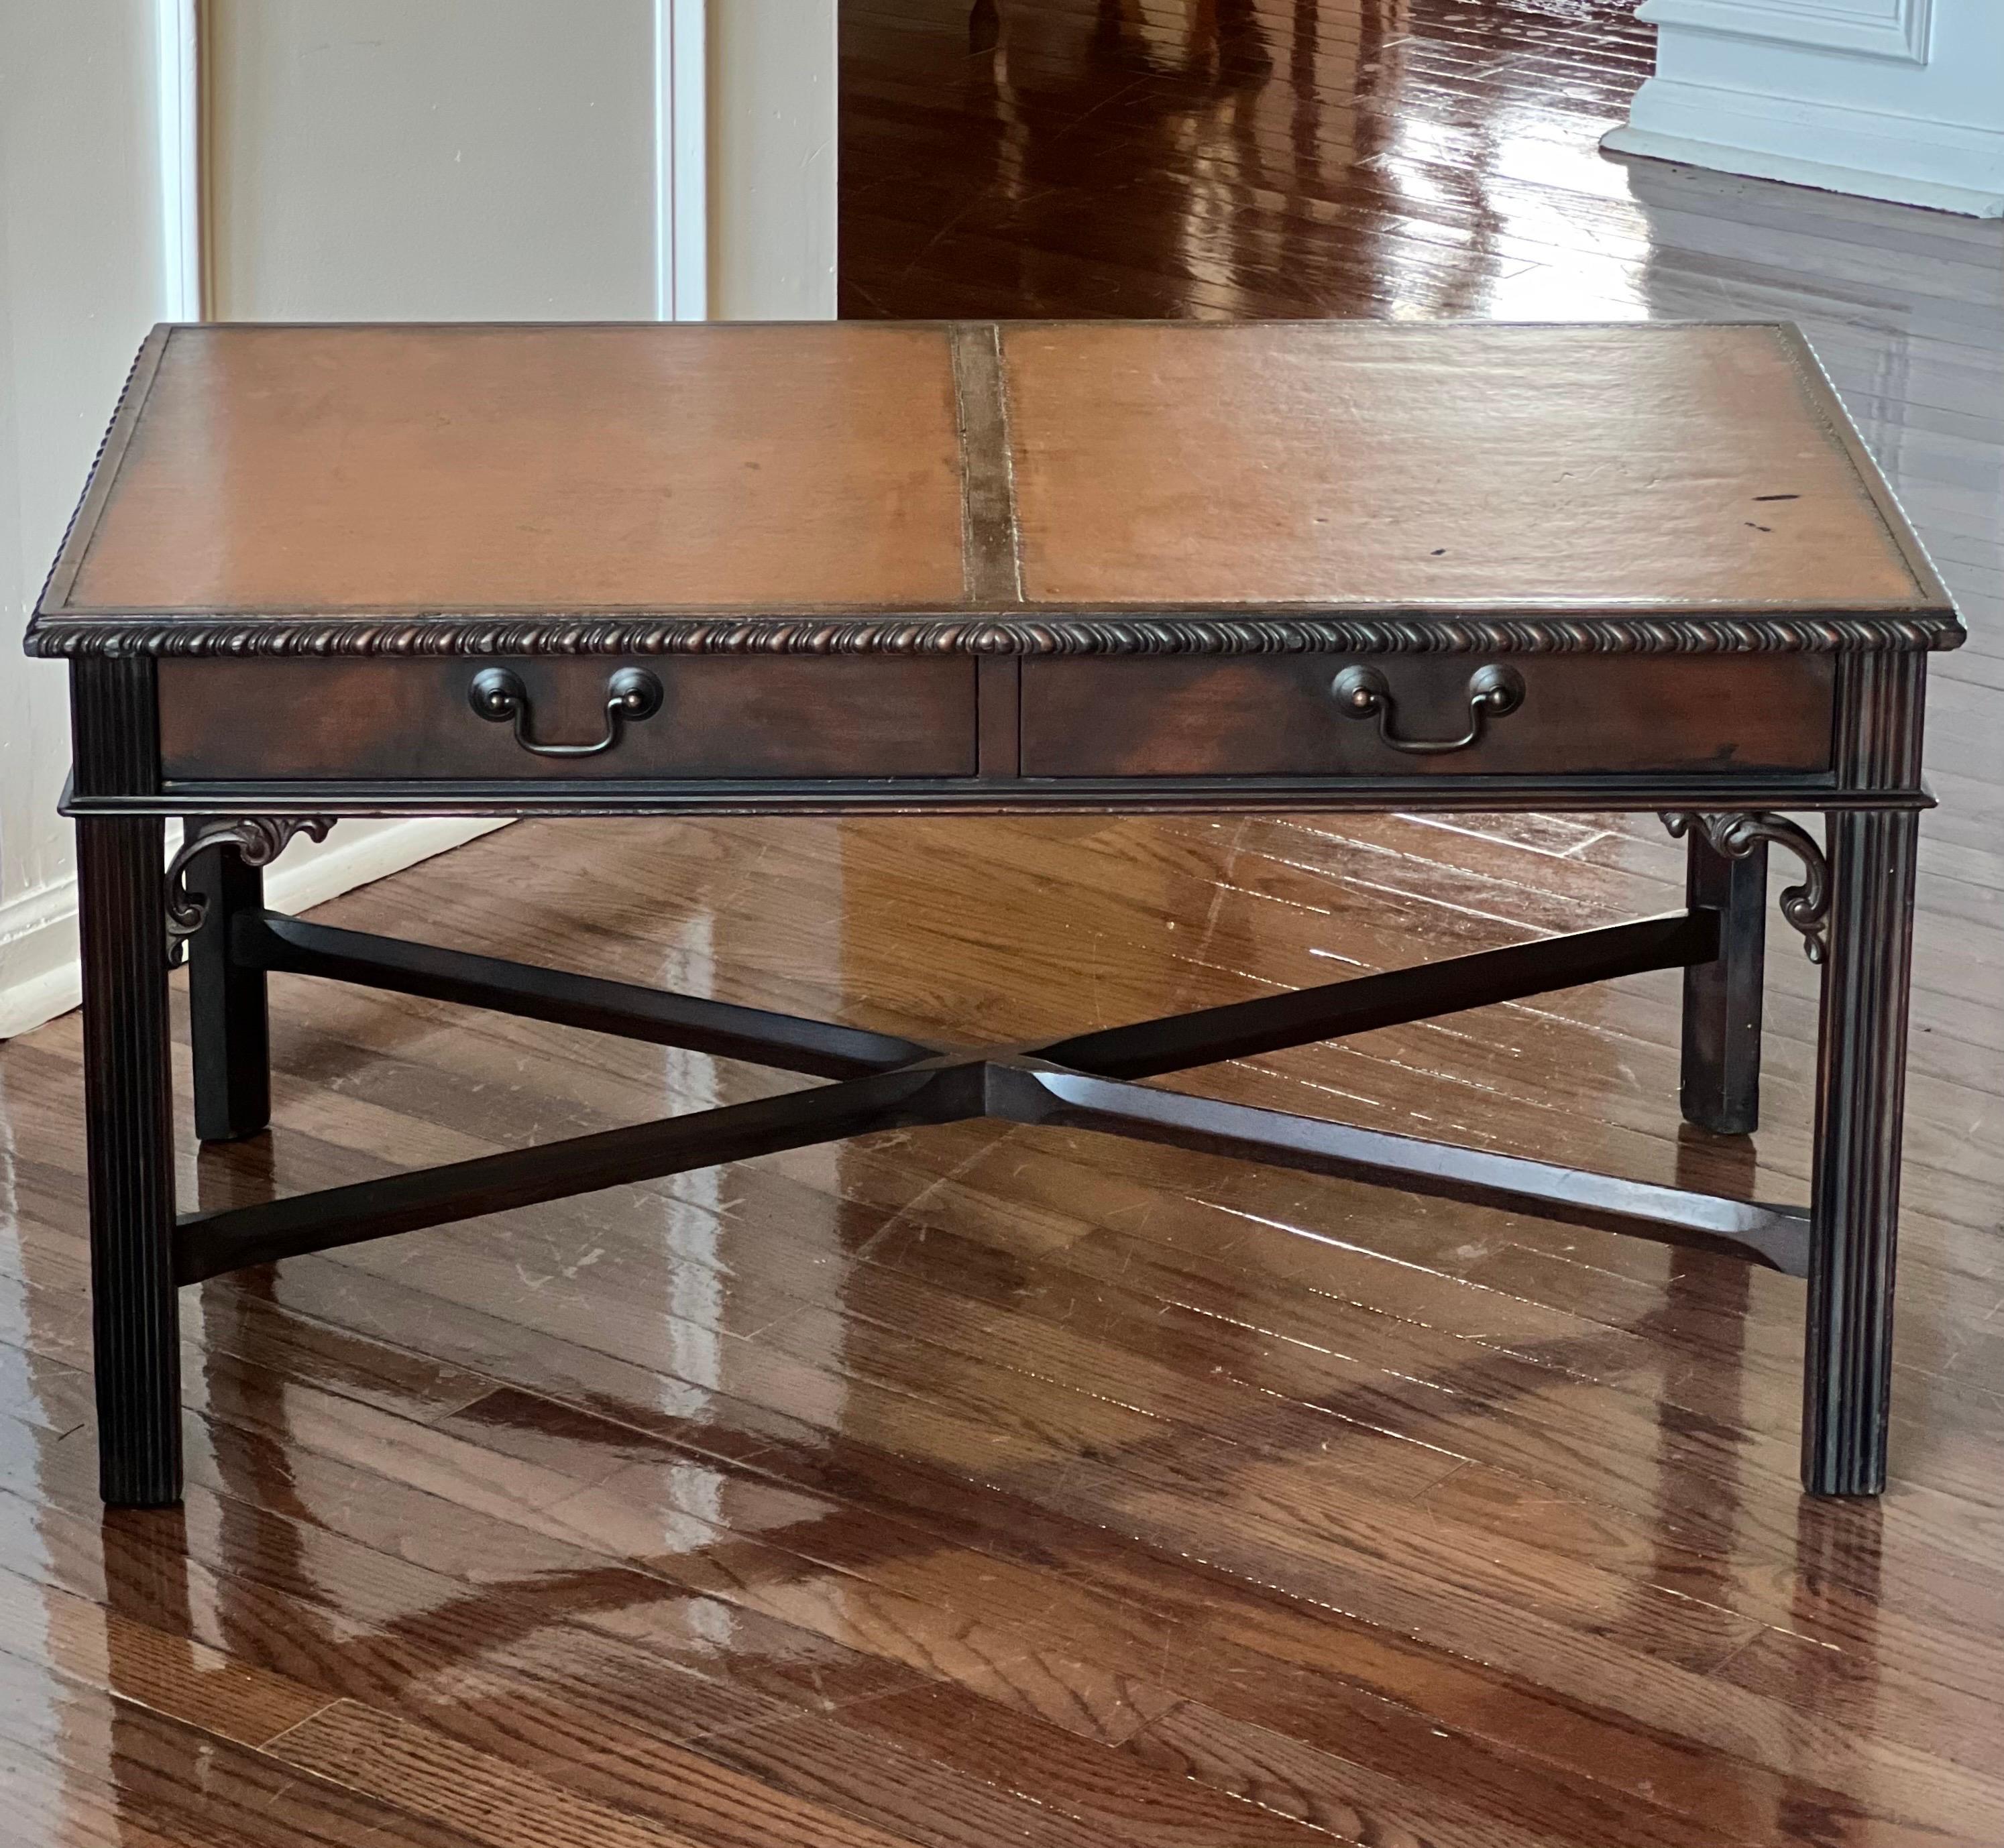 Stately mahogany Chippendale style coffee table by Imperial of Grand Rapids, c. 1940's.

A great table featuring a dual panel leather top and two dovetailed drawers with bronze finish hardware. Finely detailed with carved scroll work, square fluted